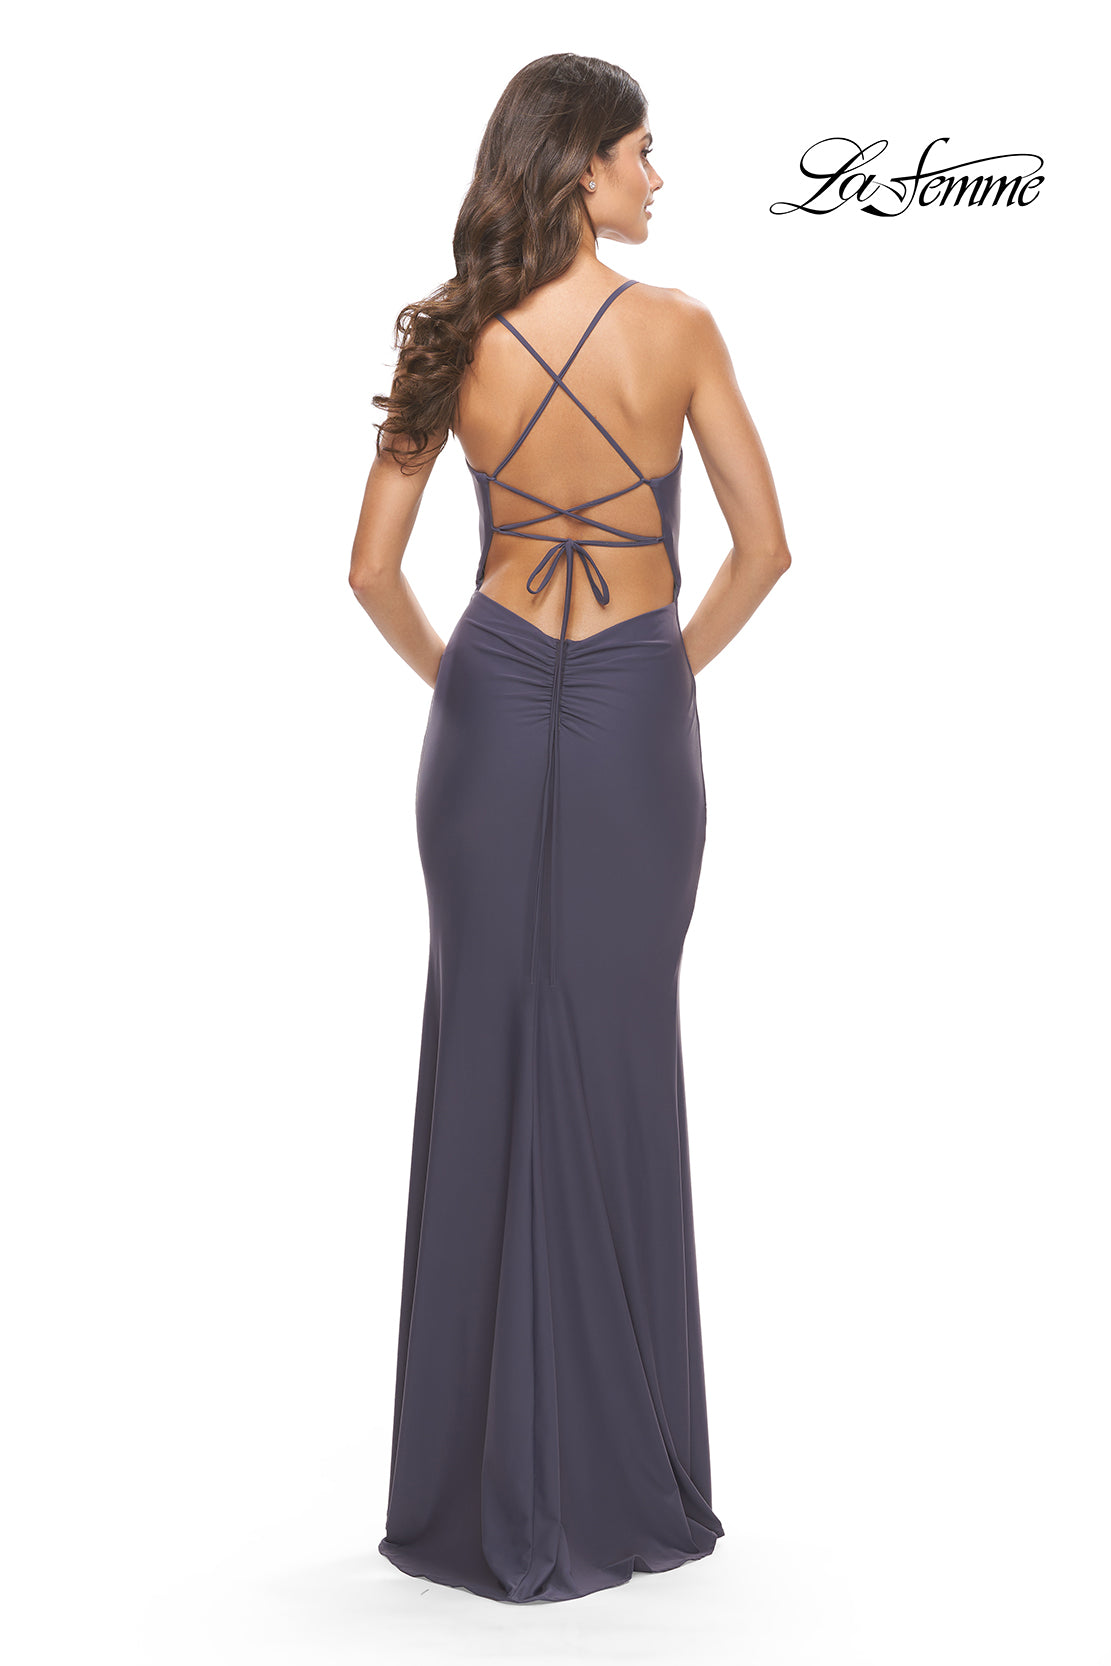 La Femme Simple Long Prom Dress with Lace-Up Back